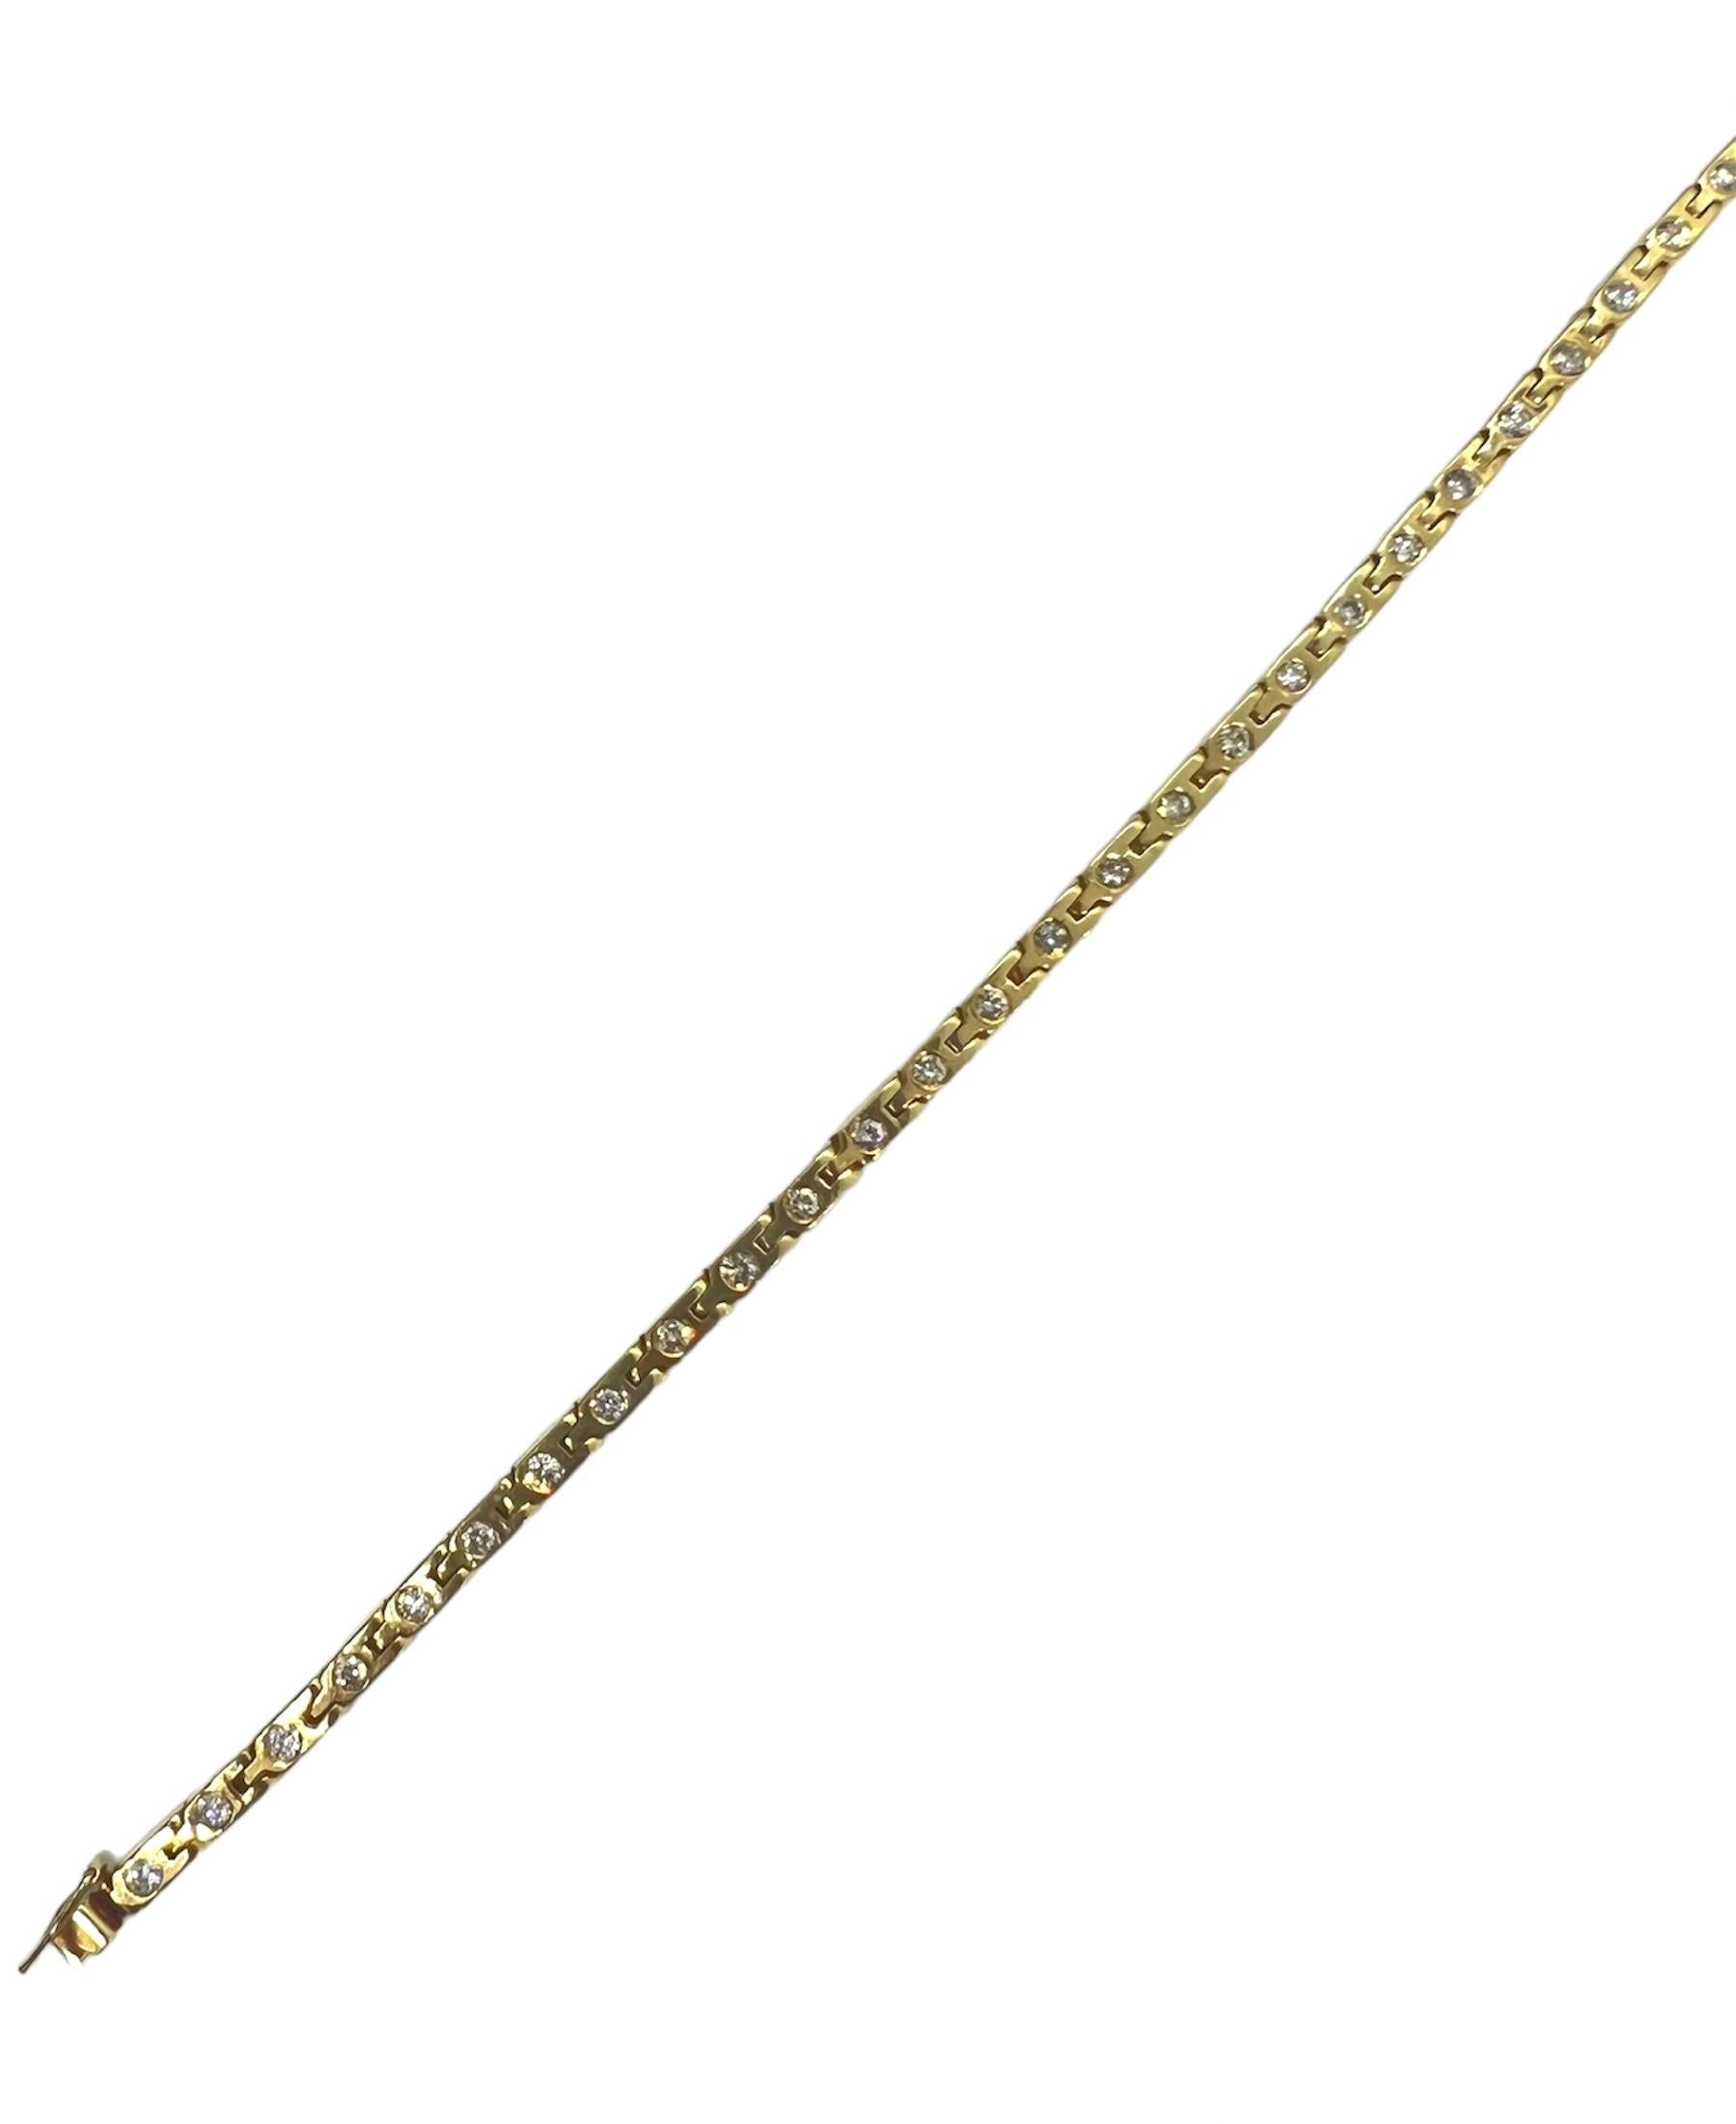 14K yellow gold bracelet with diamonds.

Sophia D by Joseph Dardashti LTD has been known worldwide for 35 years and are inspired by classic Art Deco design that merges with modern manufacturing techniques.